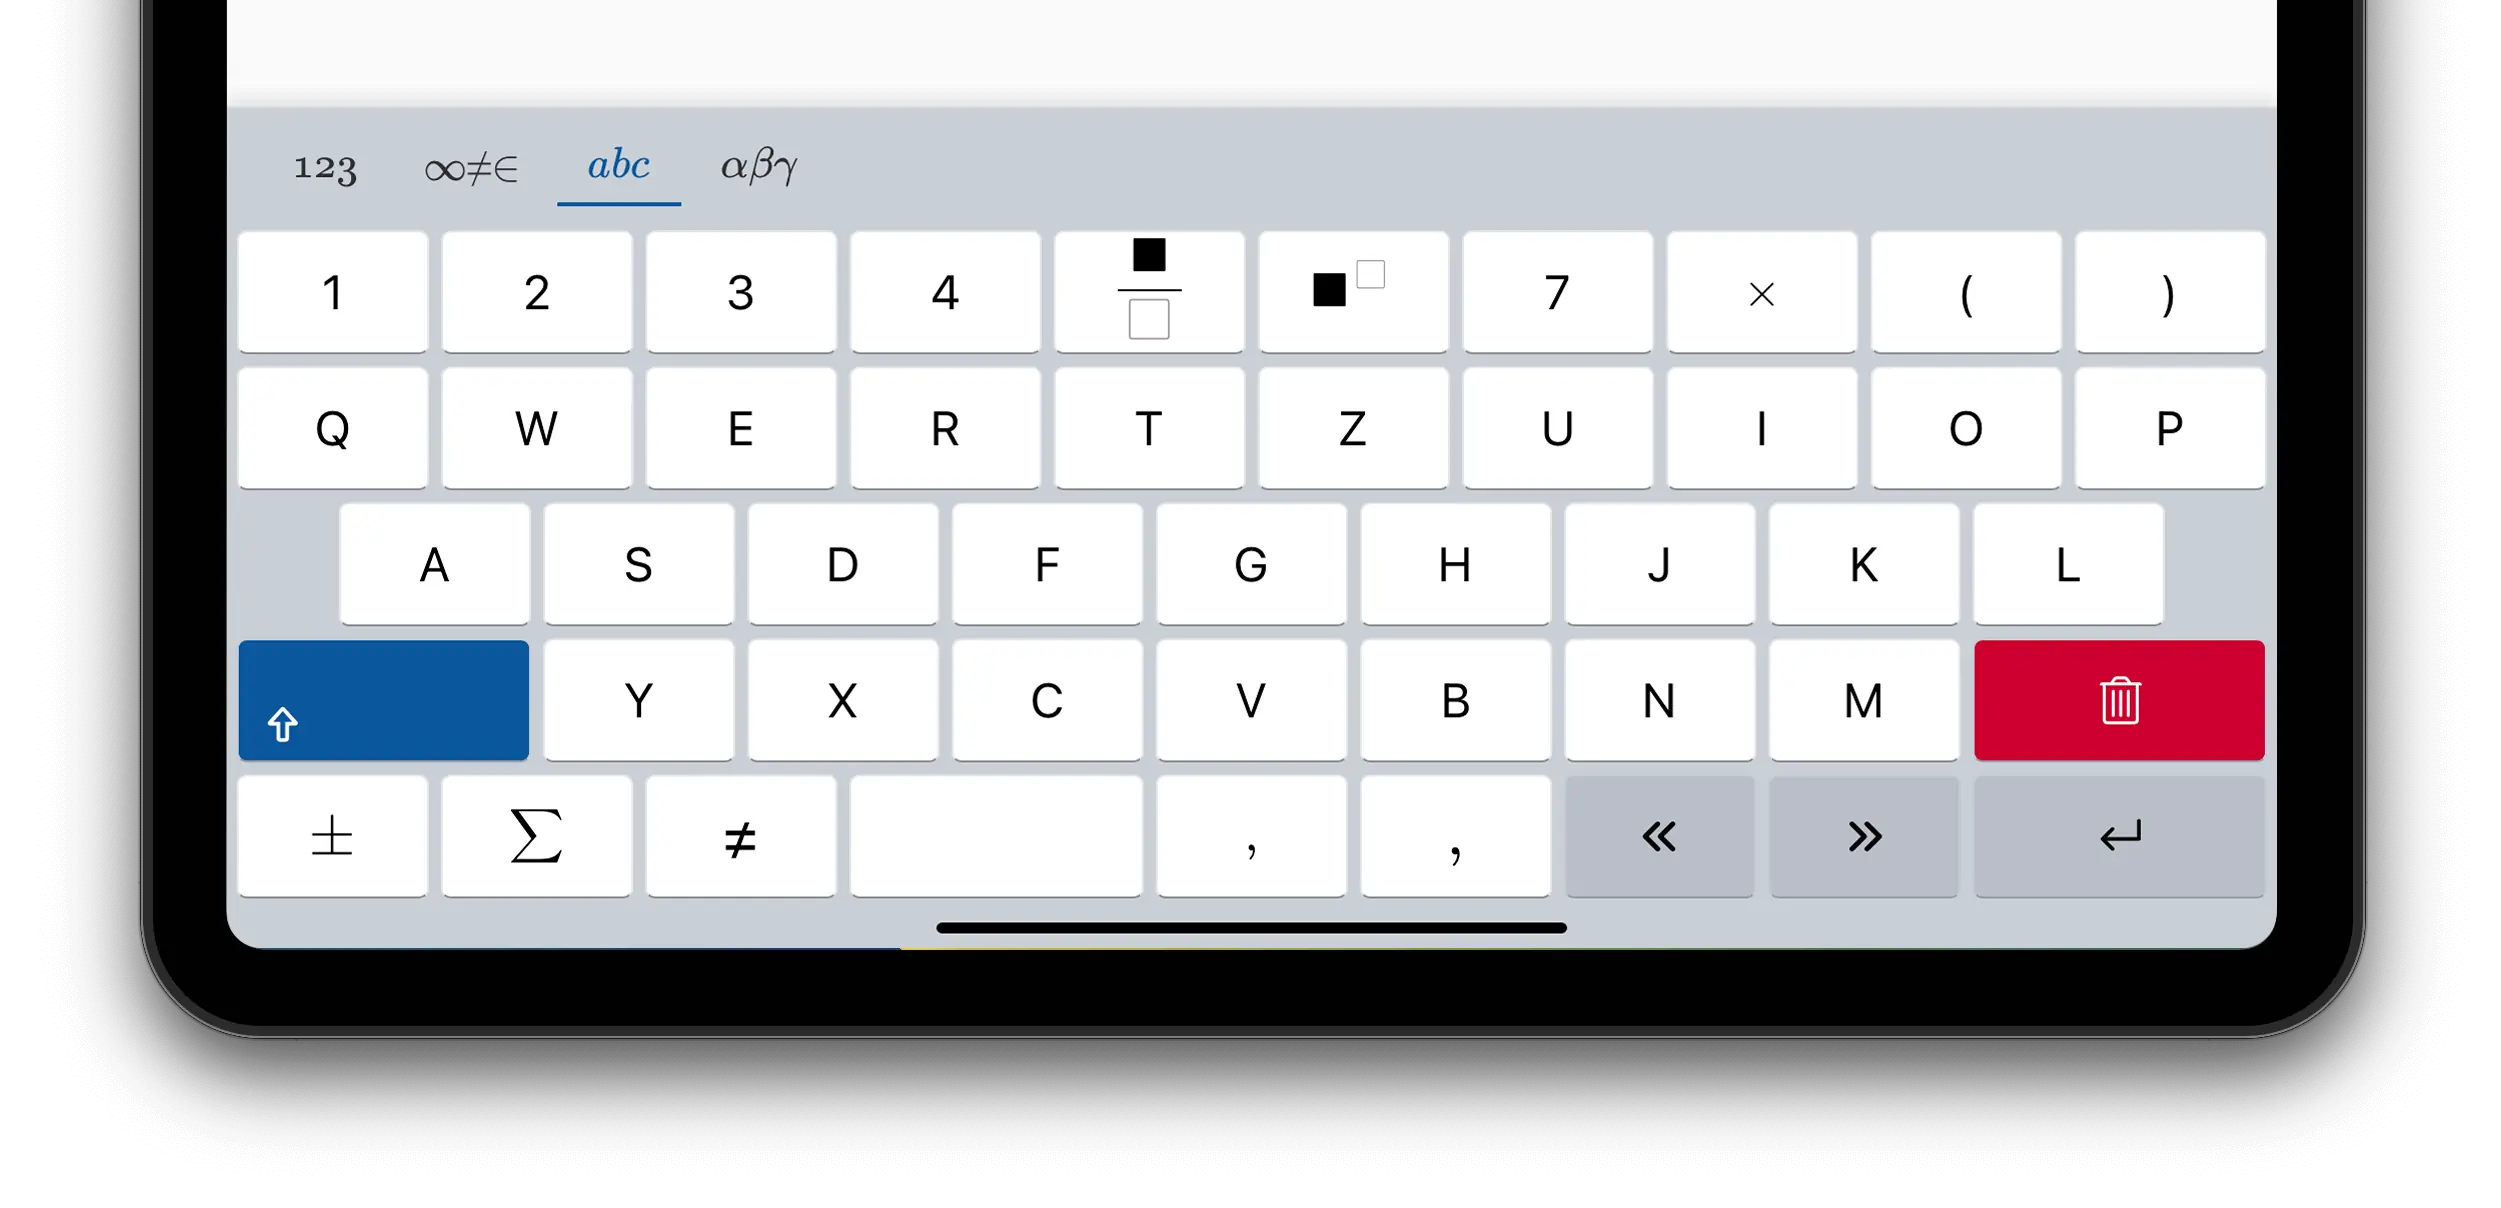 QWERTZ layout, shifted